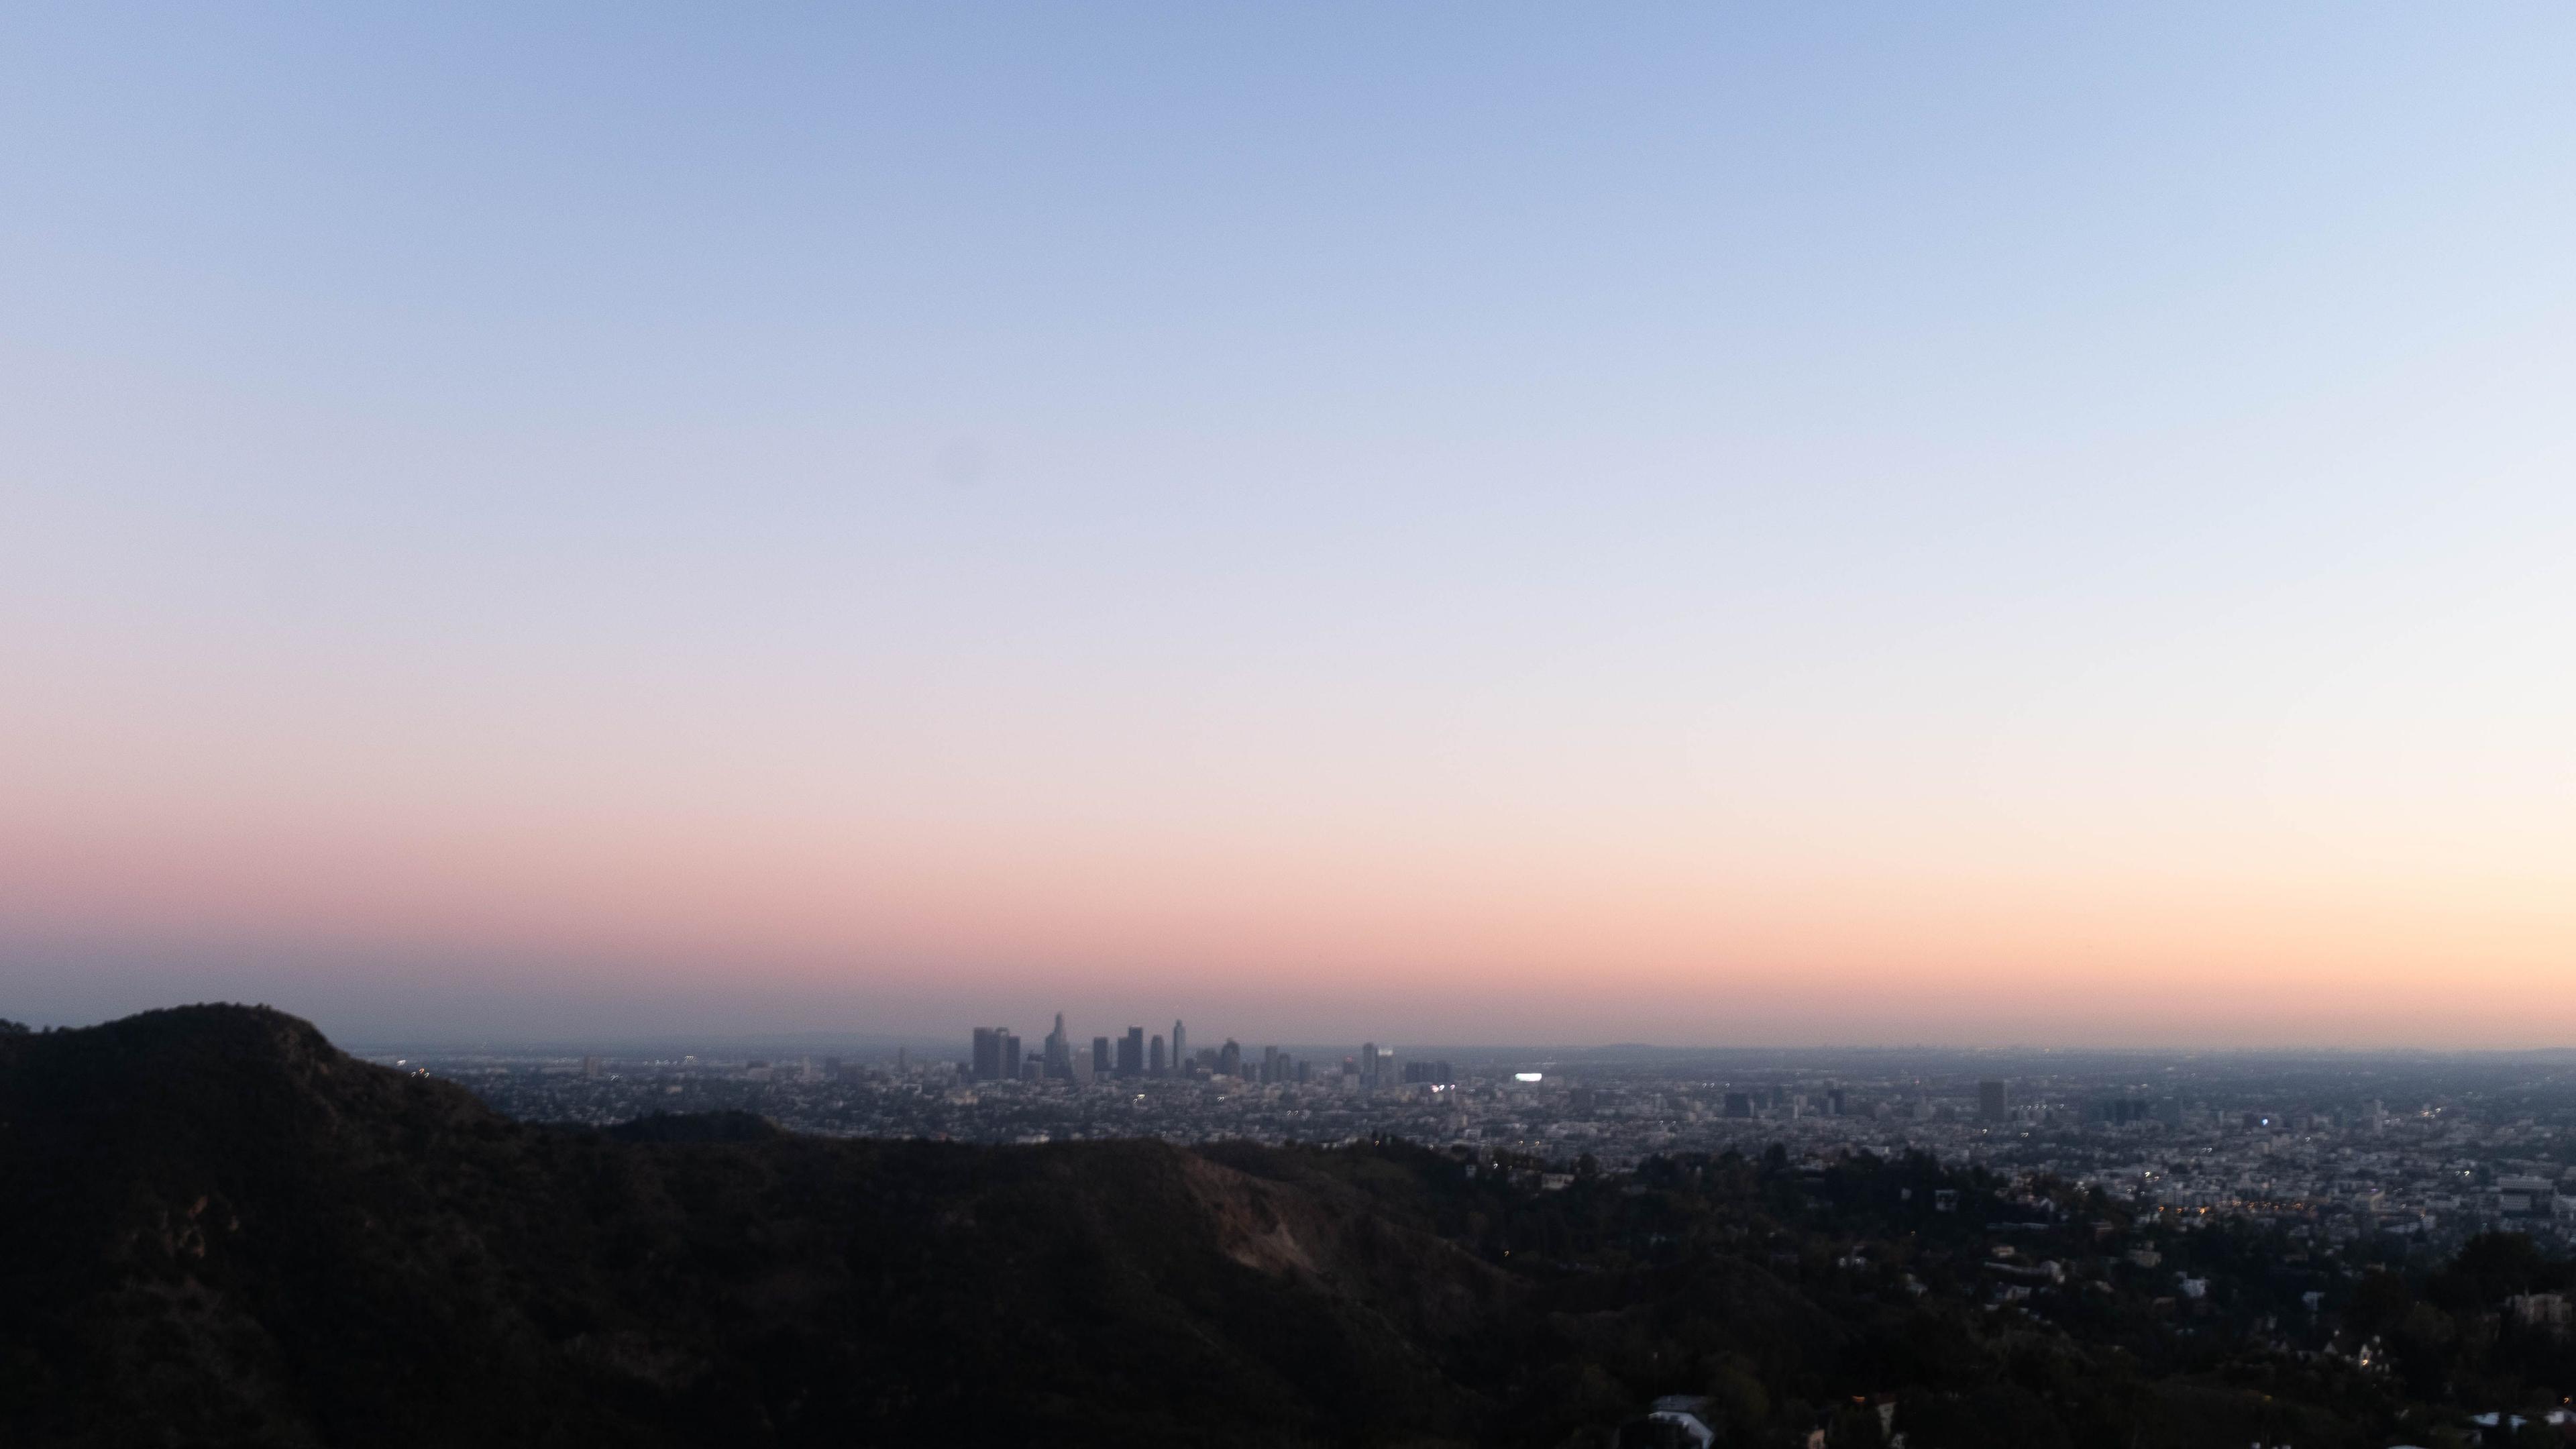 Hollywood hills view at sunset